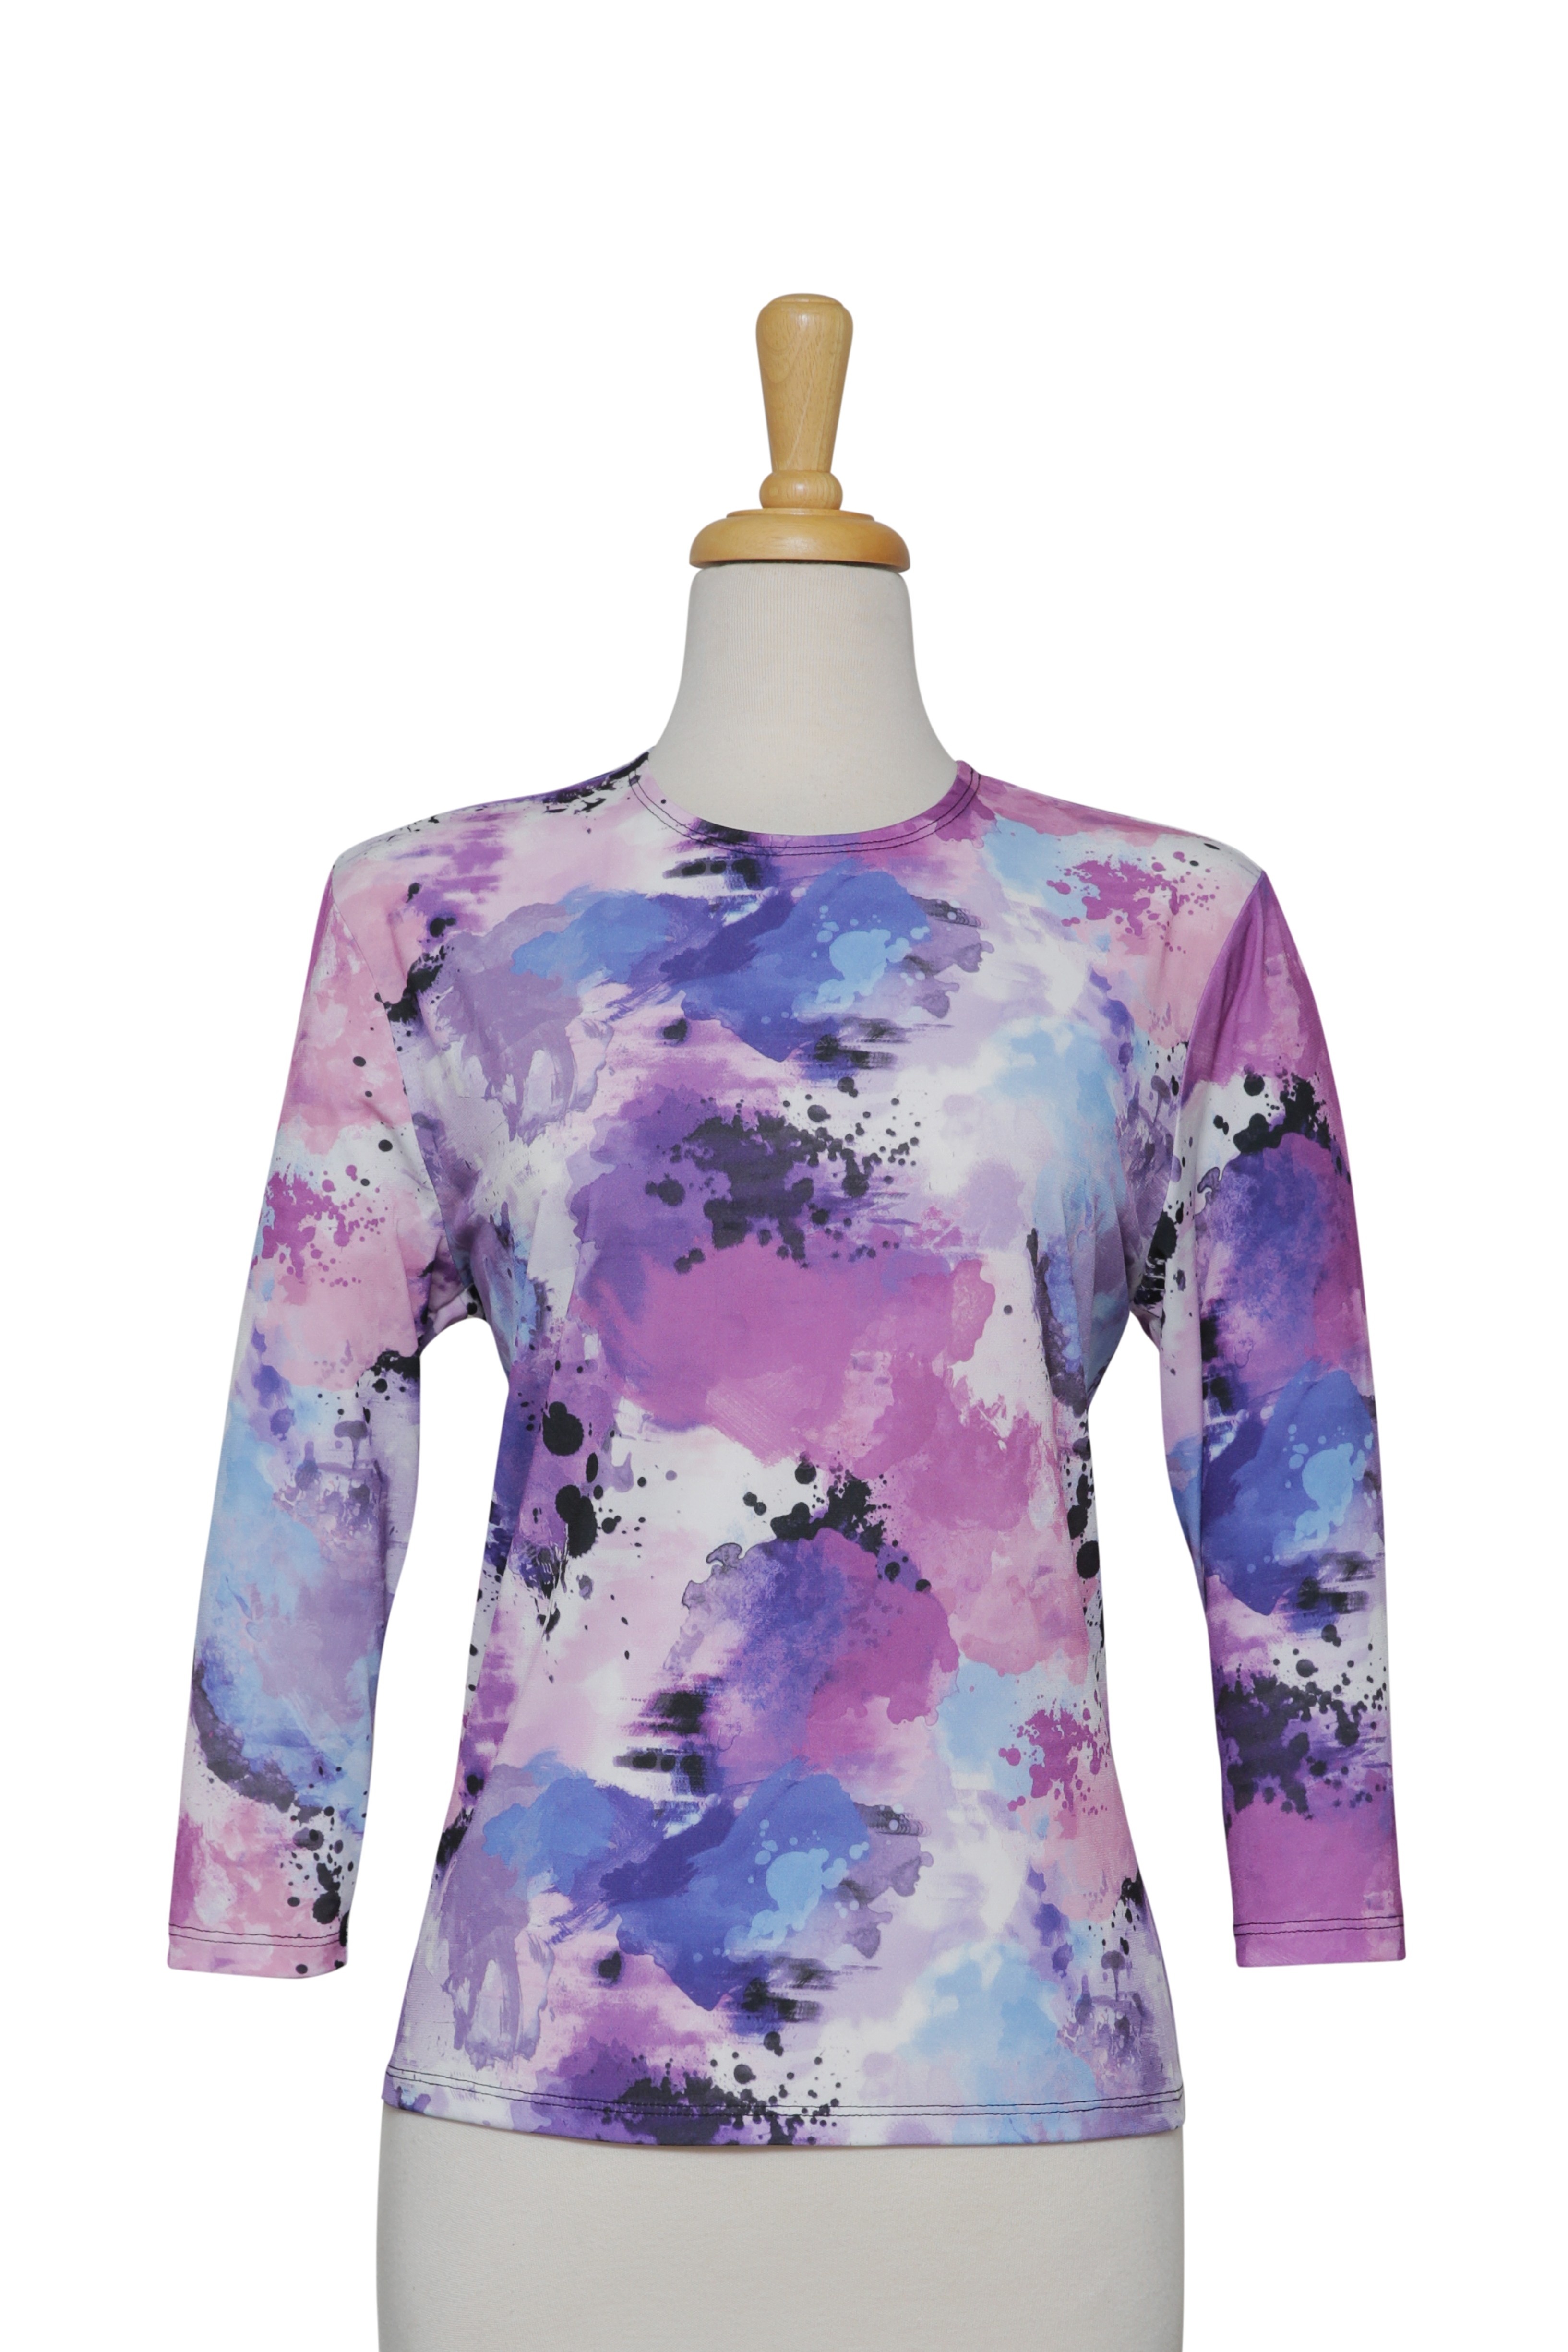 Shades of Mauve, Blue and White Muted Print Microfiber 3/4 Sleeve Top 